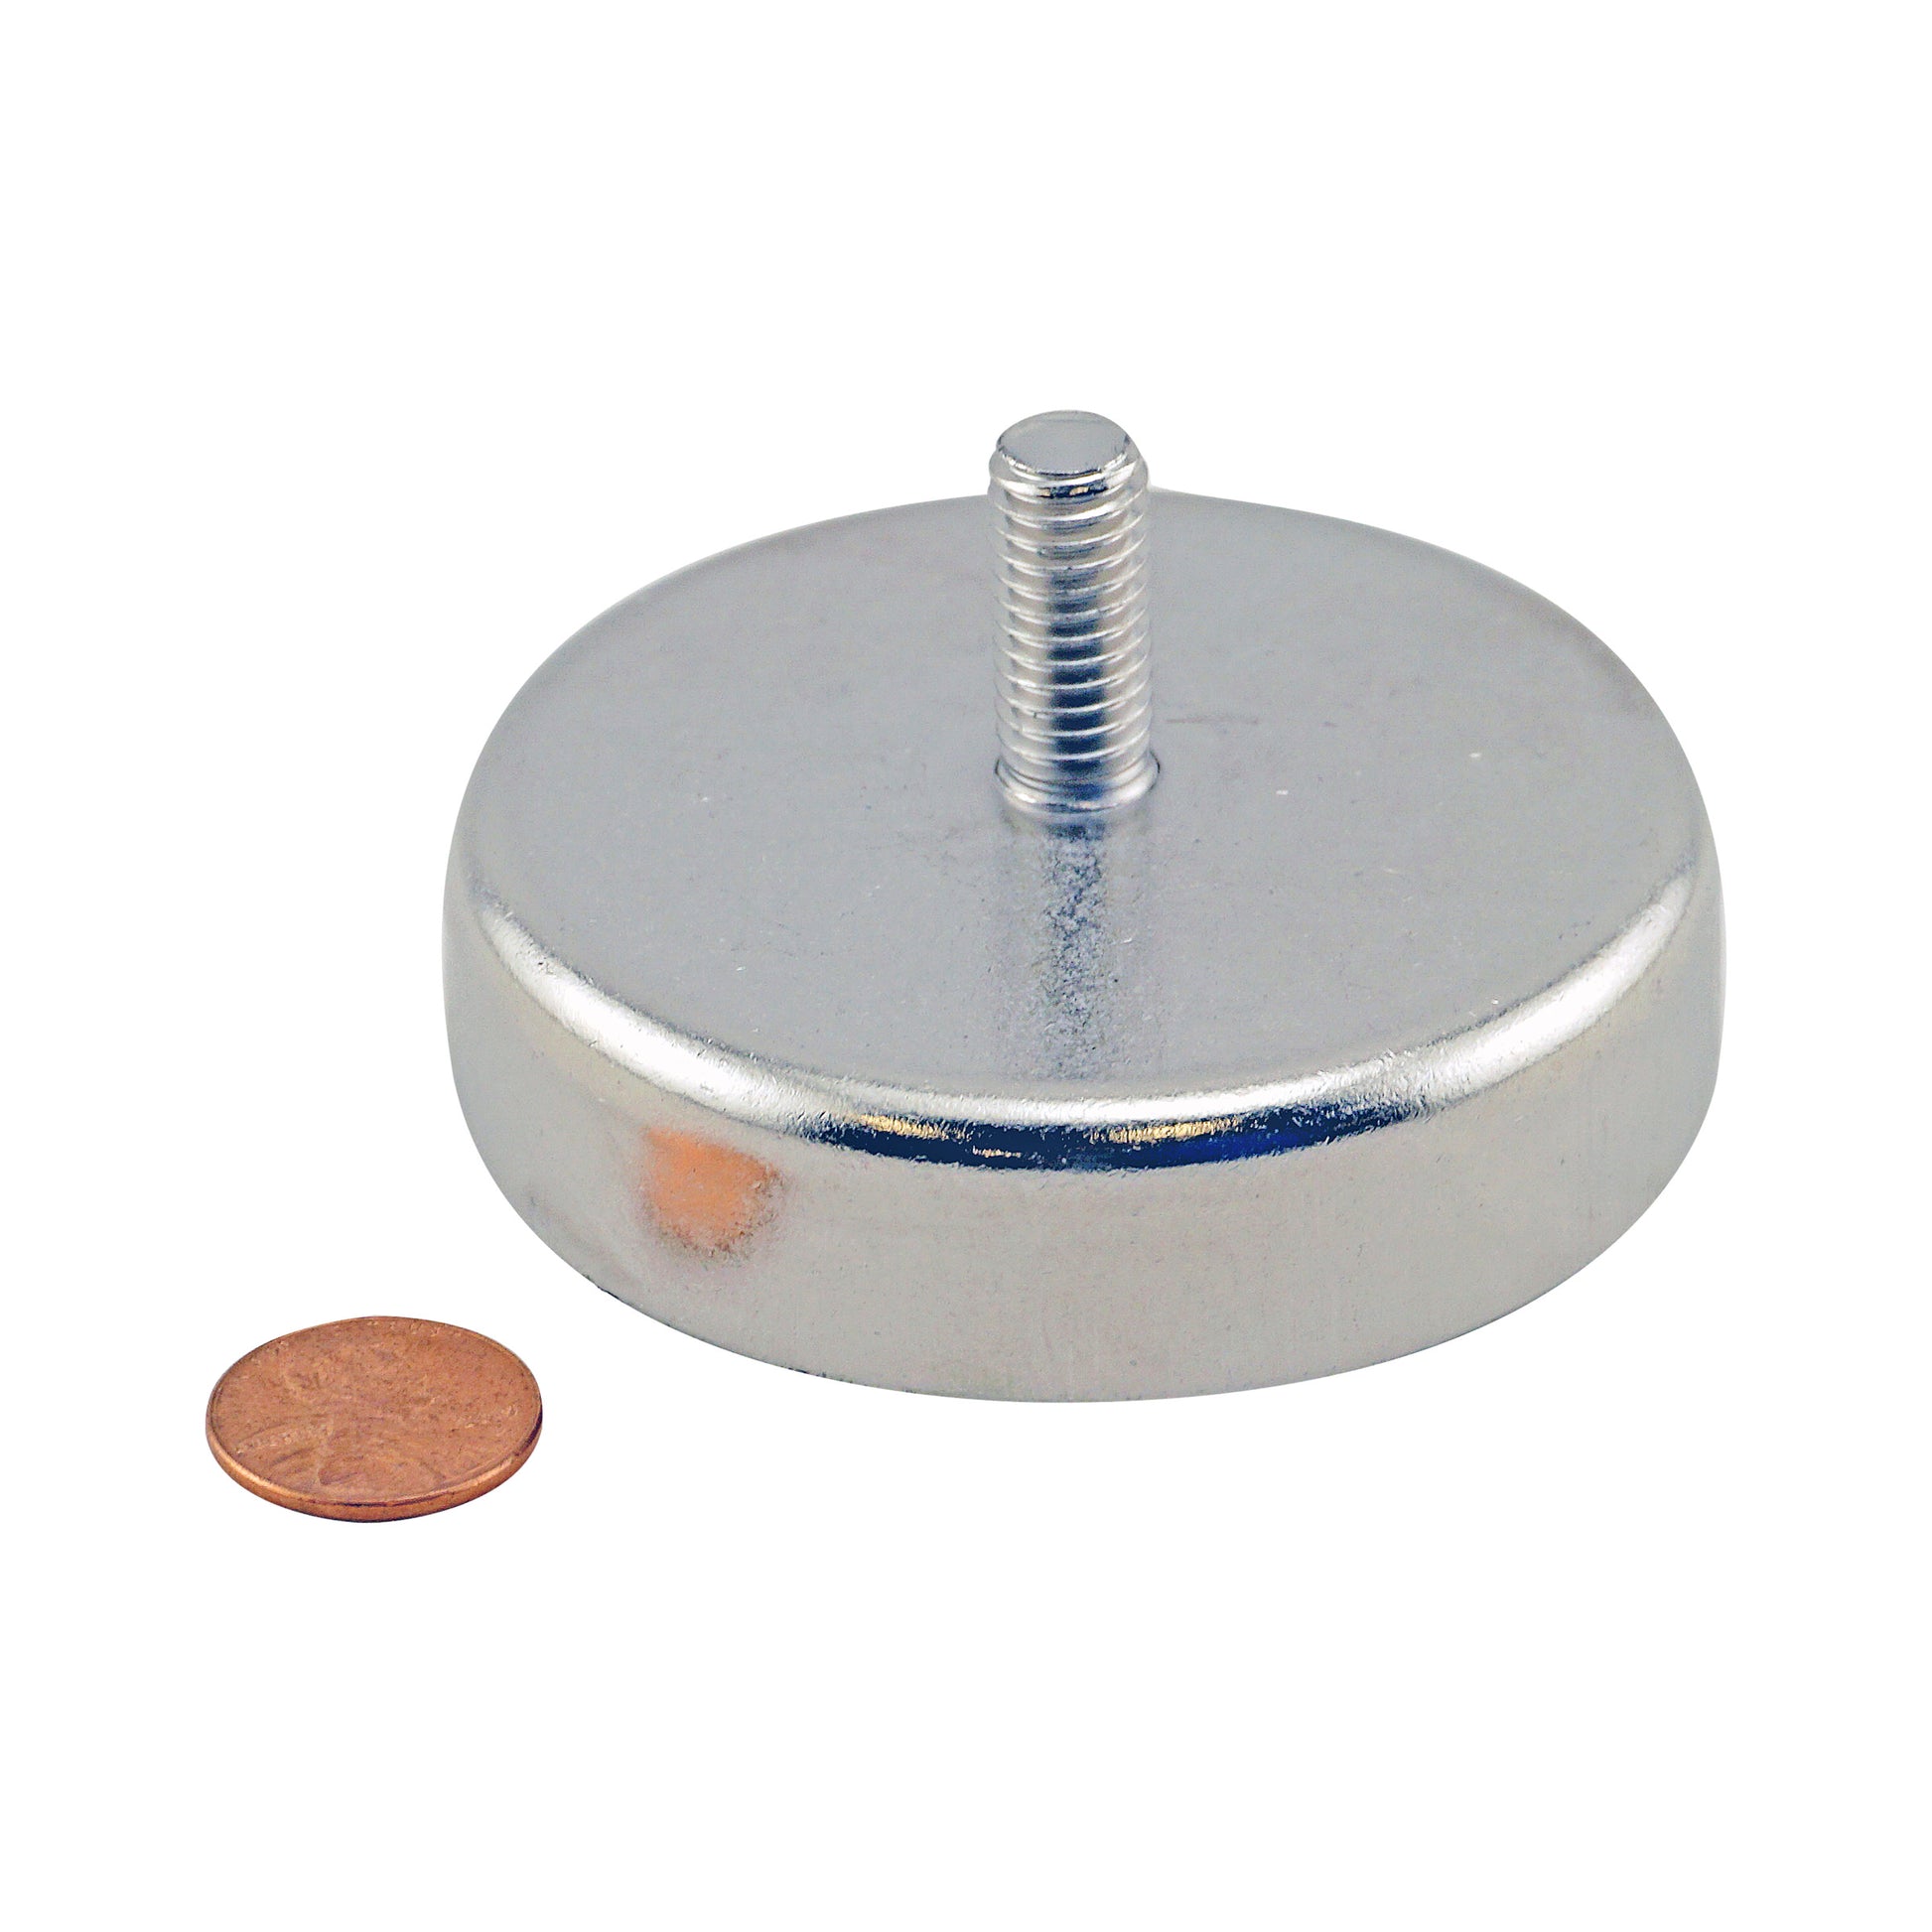 Load image into Gallery viewer, CACM300 Heavy-Duty Ceramic Round Base Magnet with Male Thread - Compared to Penny for Size Reference